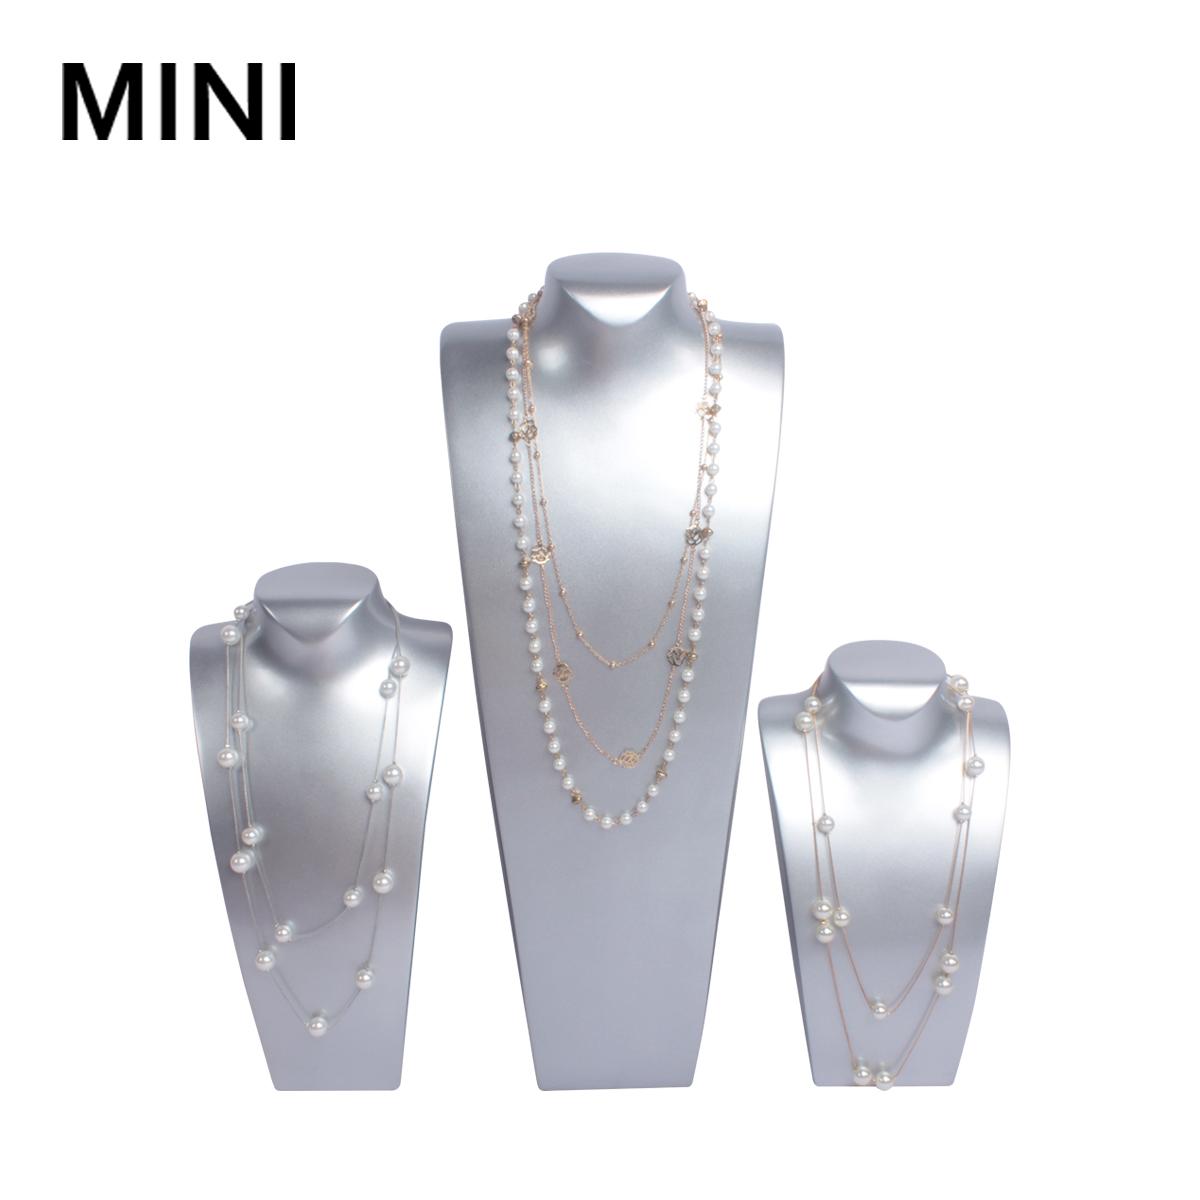 Hight quality bust necklace jew